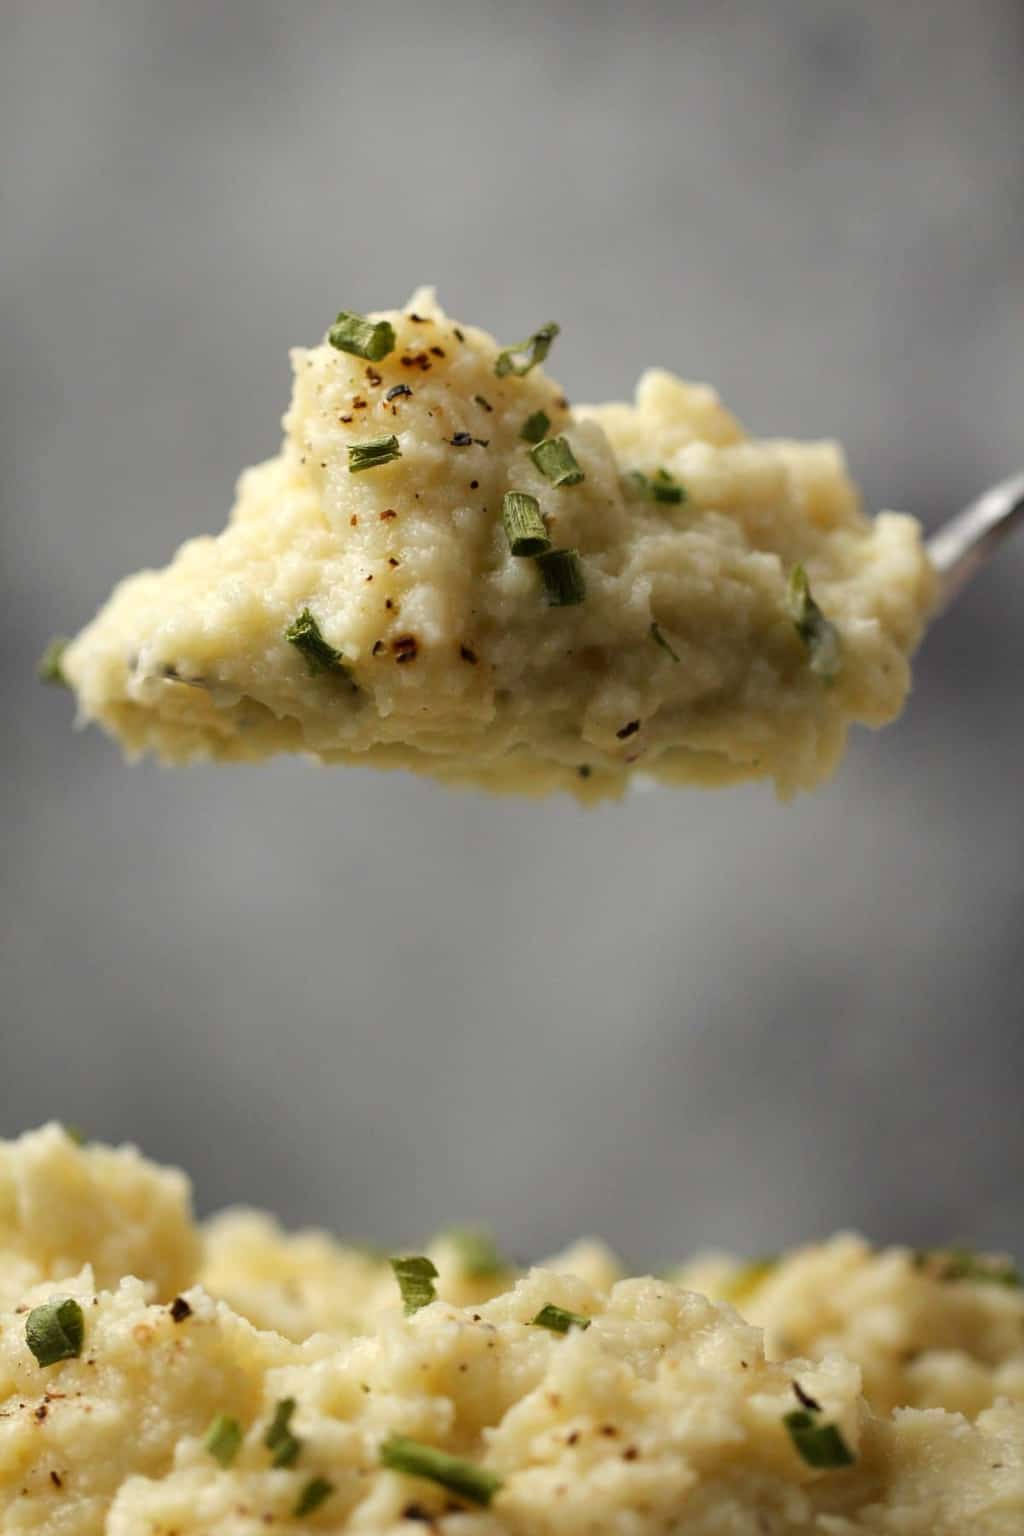 Spoonful of vegan cauliflower mashed potatoes with chopped chives.